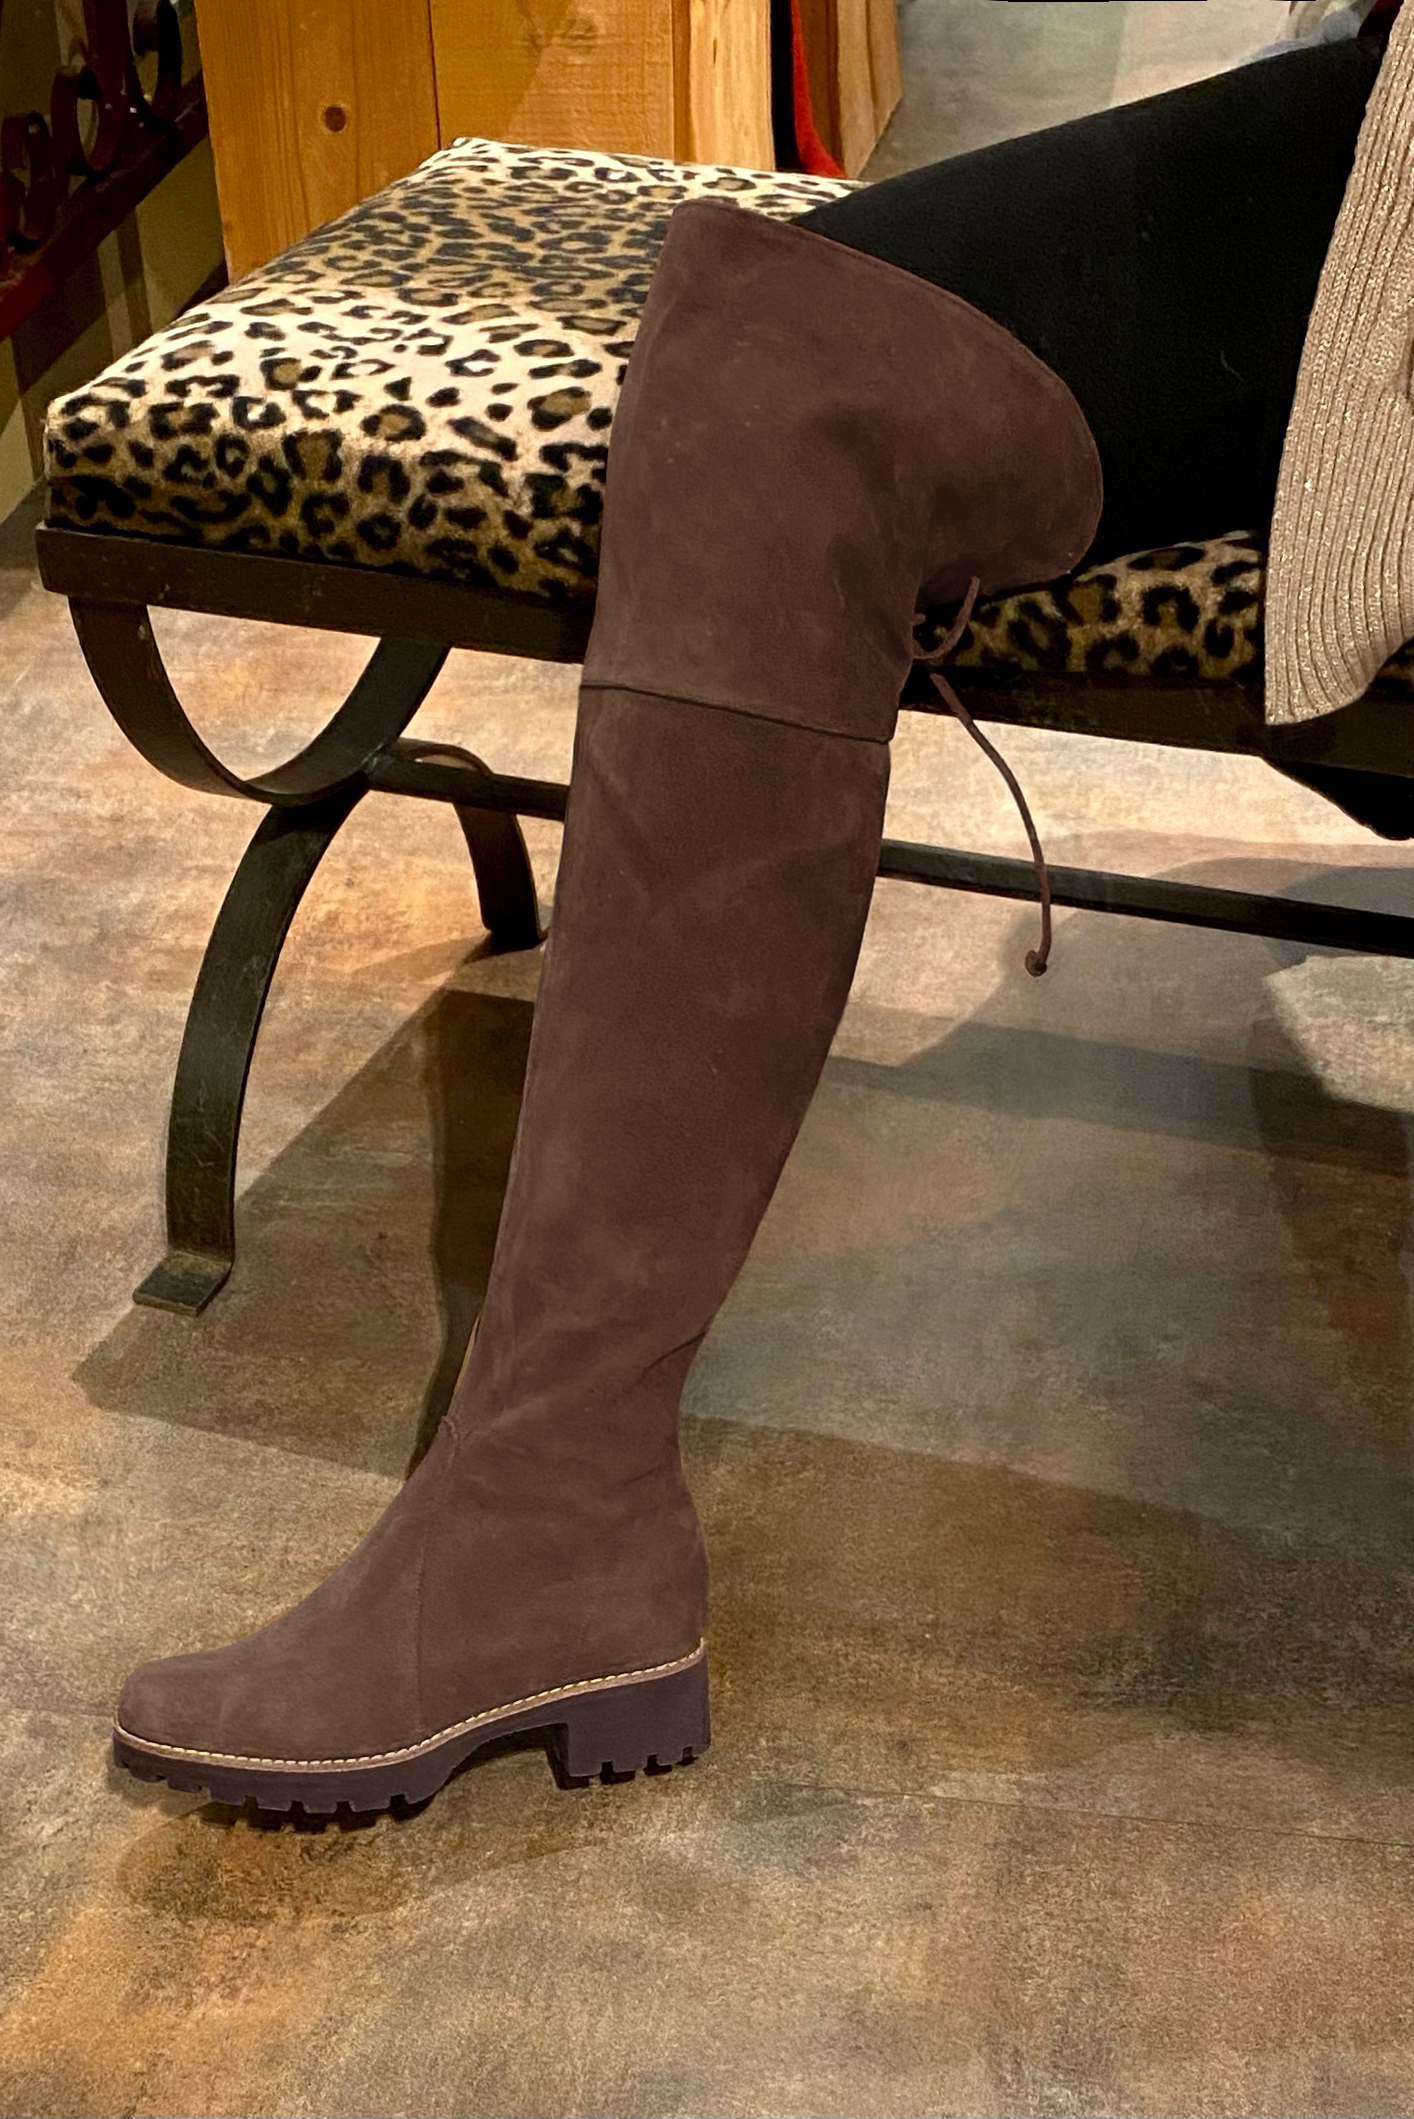 Chocolate brown women's leather thigh-high boots. Round toe. Low rubber soles. Made to measure. Worn view - Florence KOOIJMAN